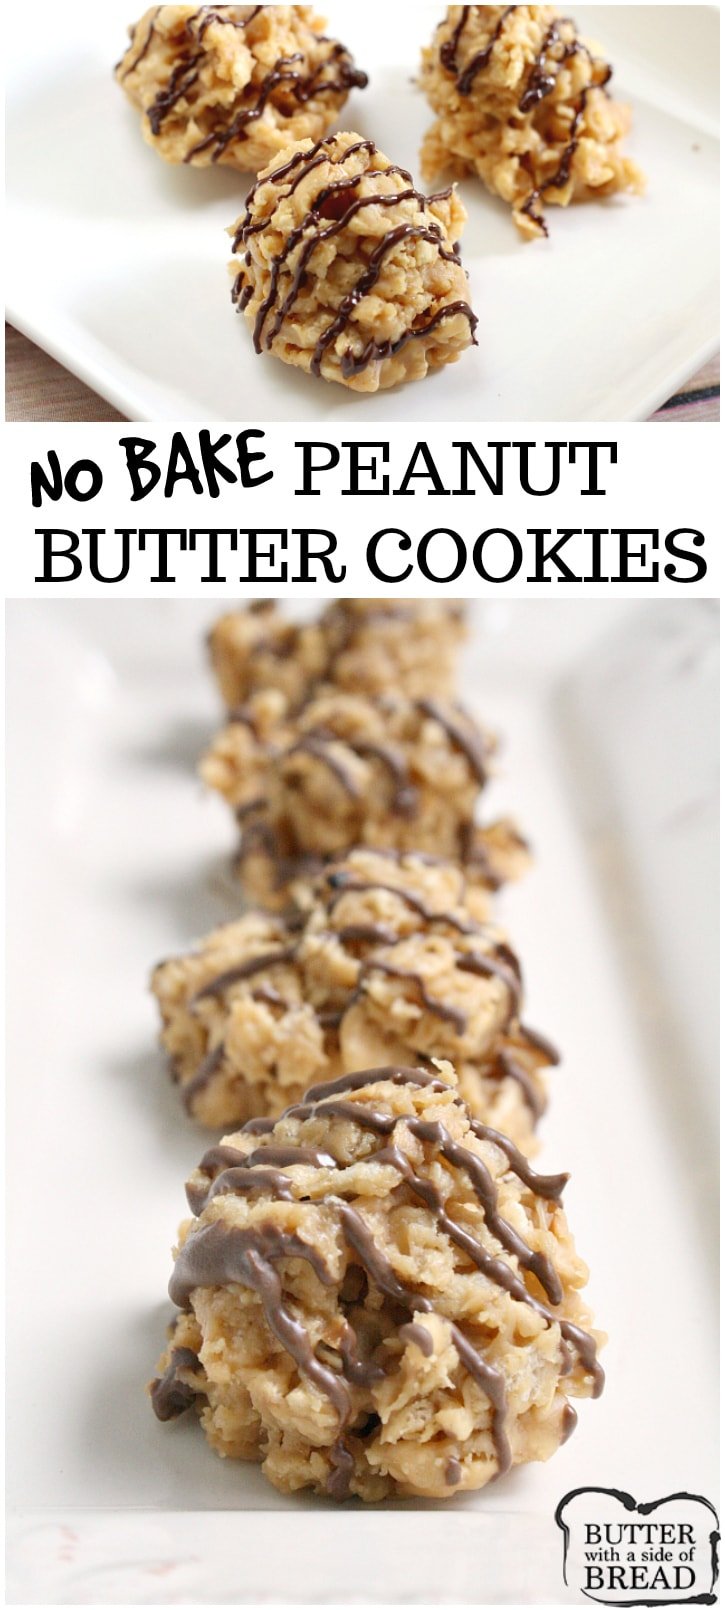 No-Bake Peanut Butter Cookies are crunchy, sweet and full of flavor. They only take a few minutes start to finish to make and EVERYONE loves them! Easy no-bake cookie recipe from Butter With A Side of Bread